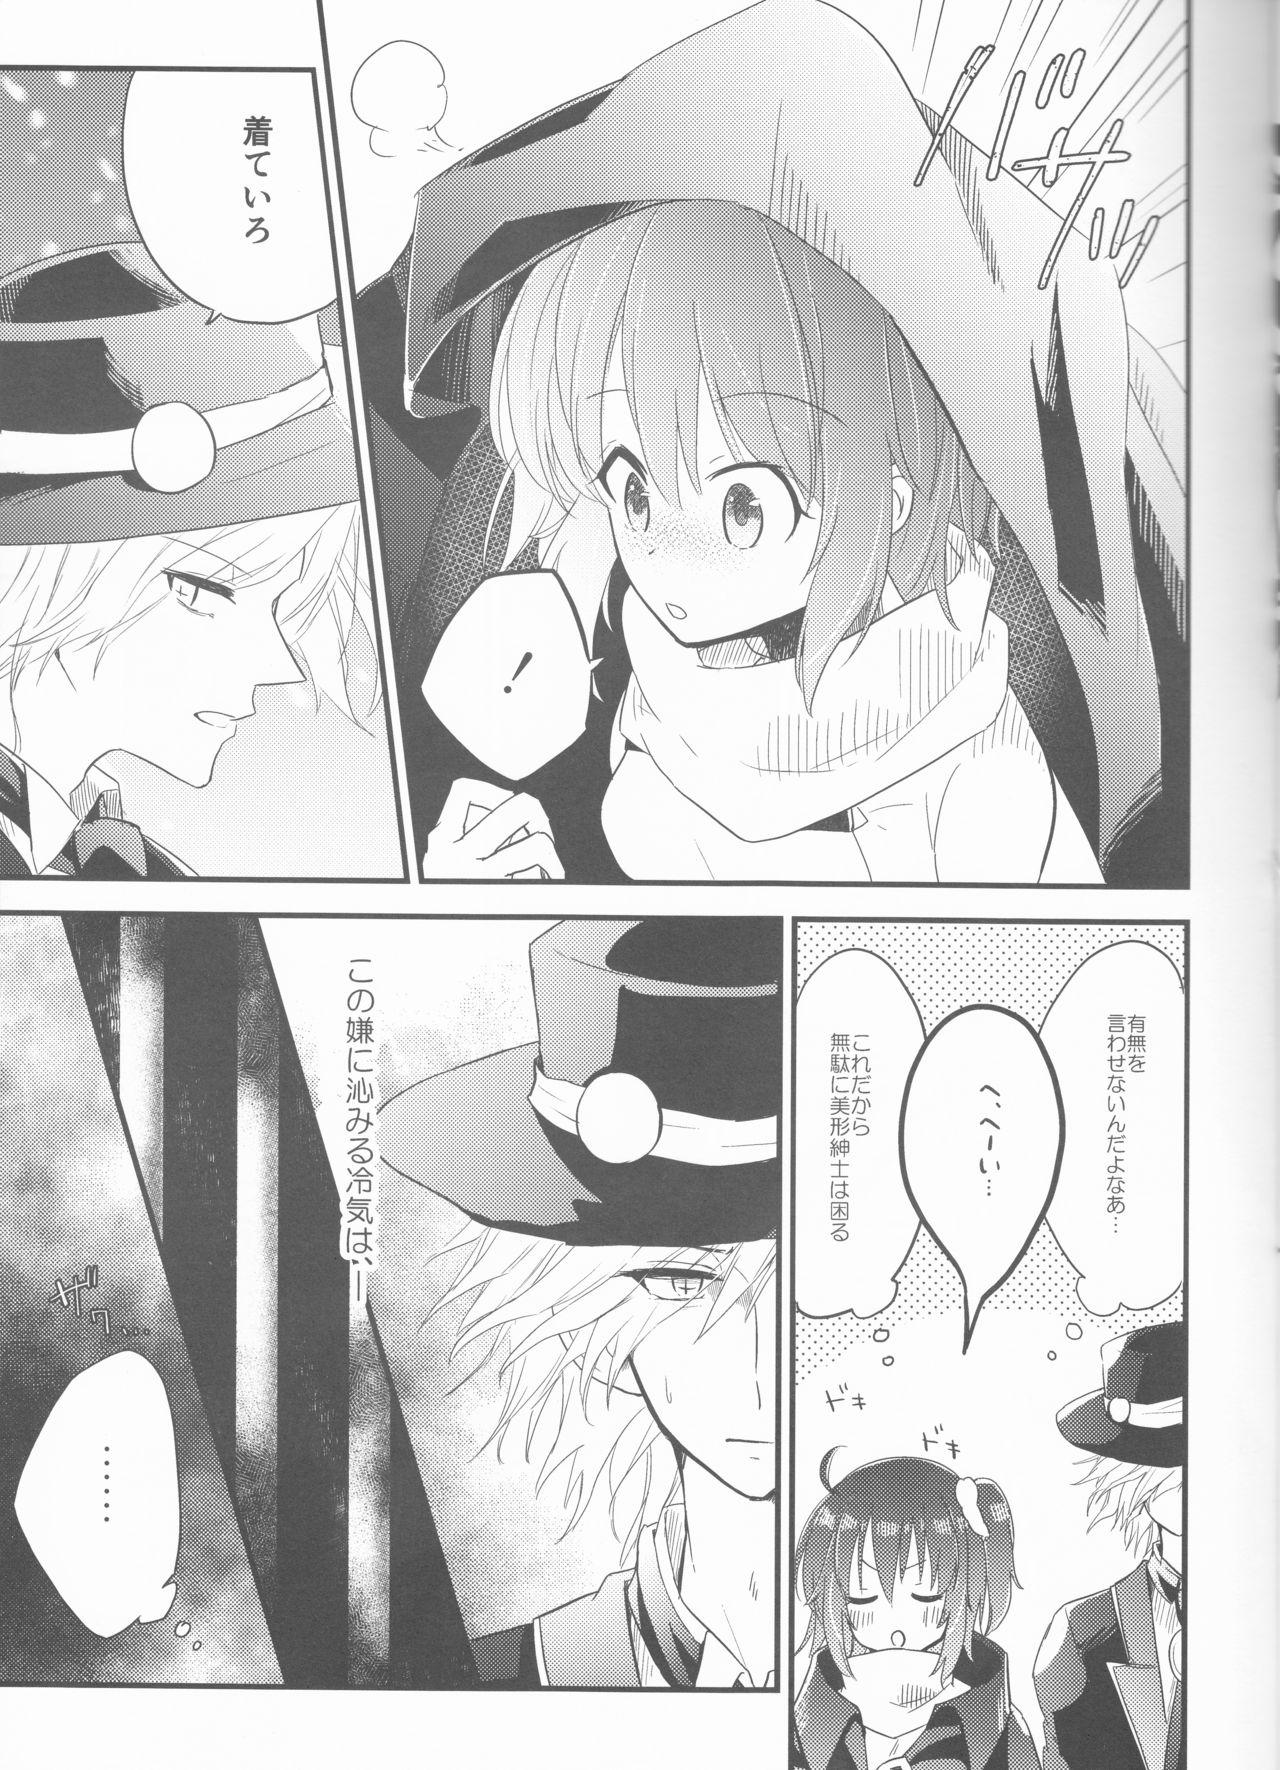 Flash Yume no Ondo - Warmth of the dream - Fate grand order Adult - Page 9